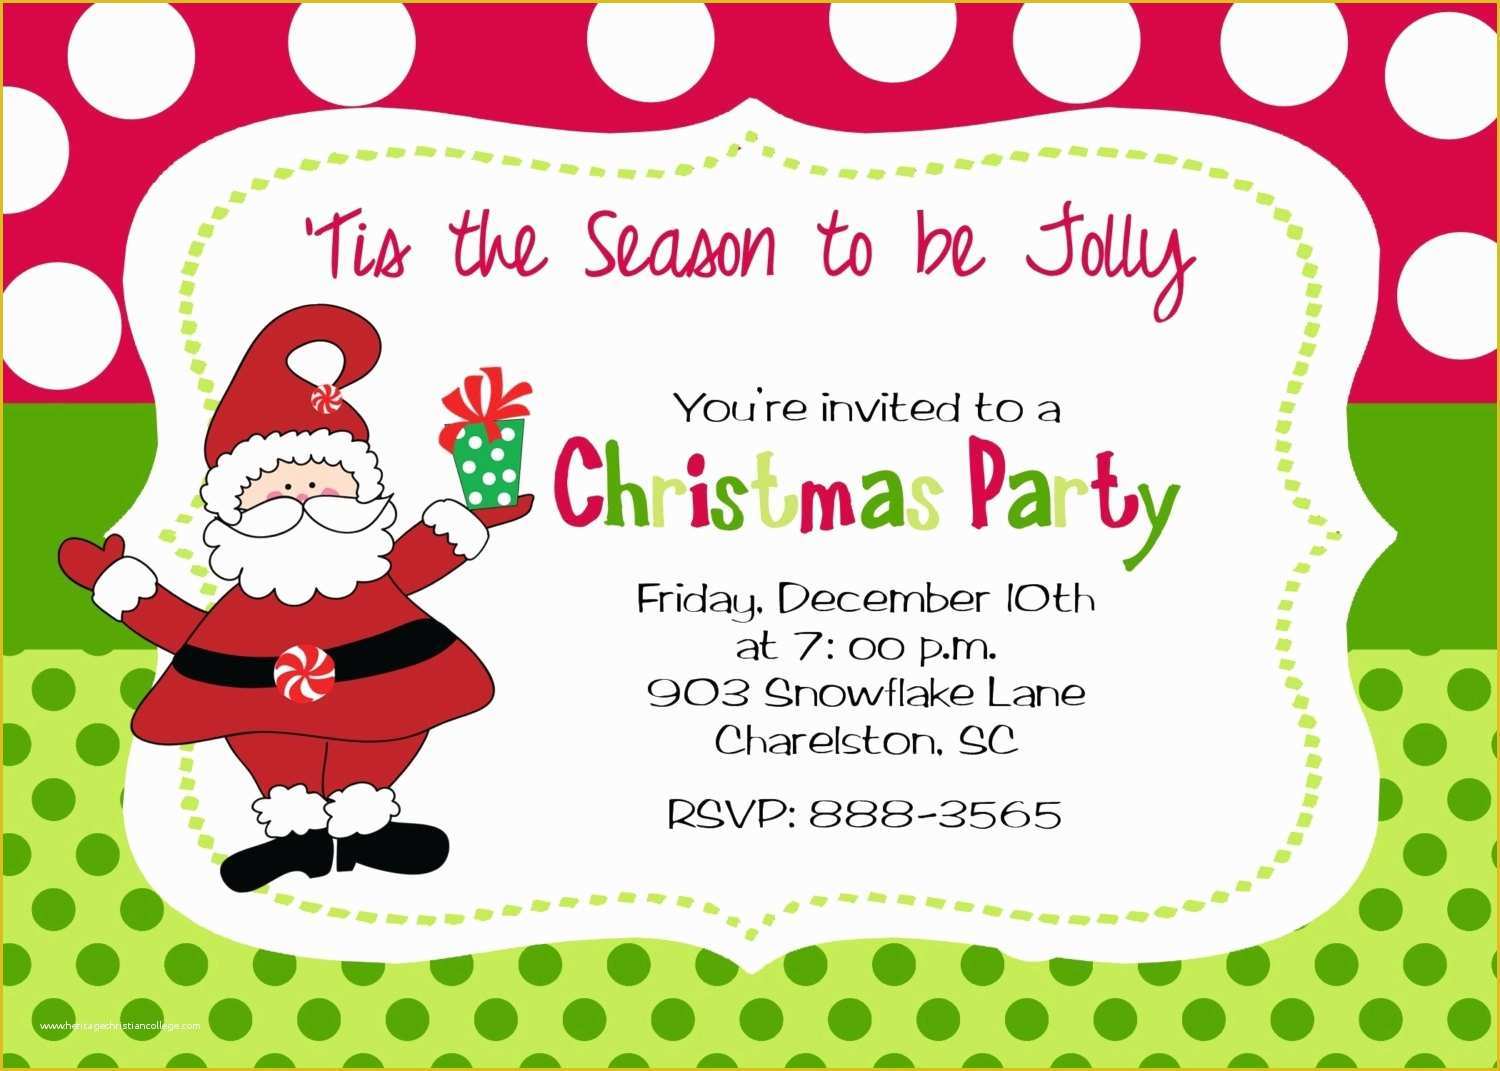 childrens-party-invitations-printable-printable-world-holiday